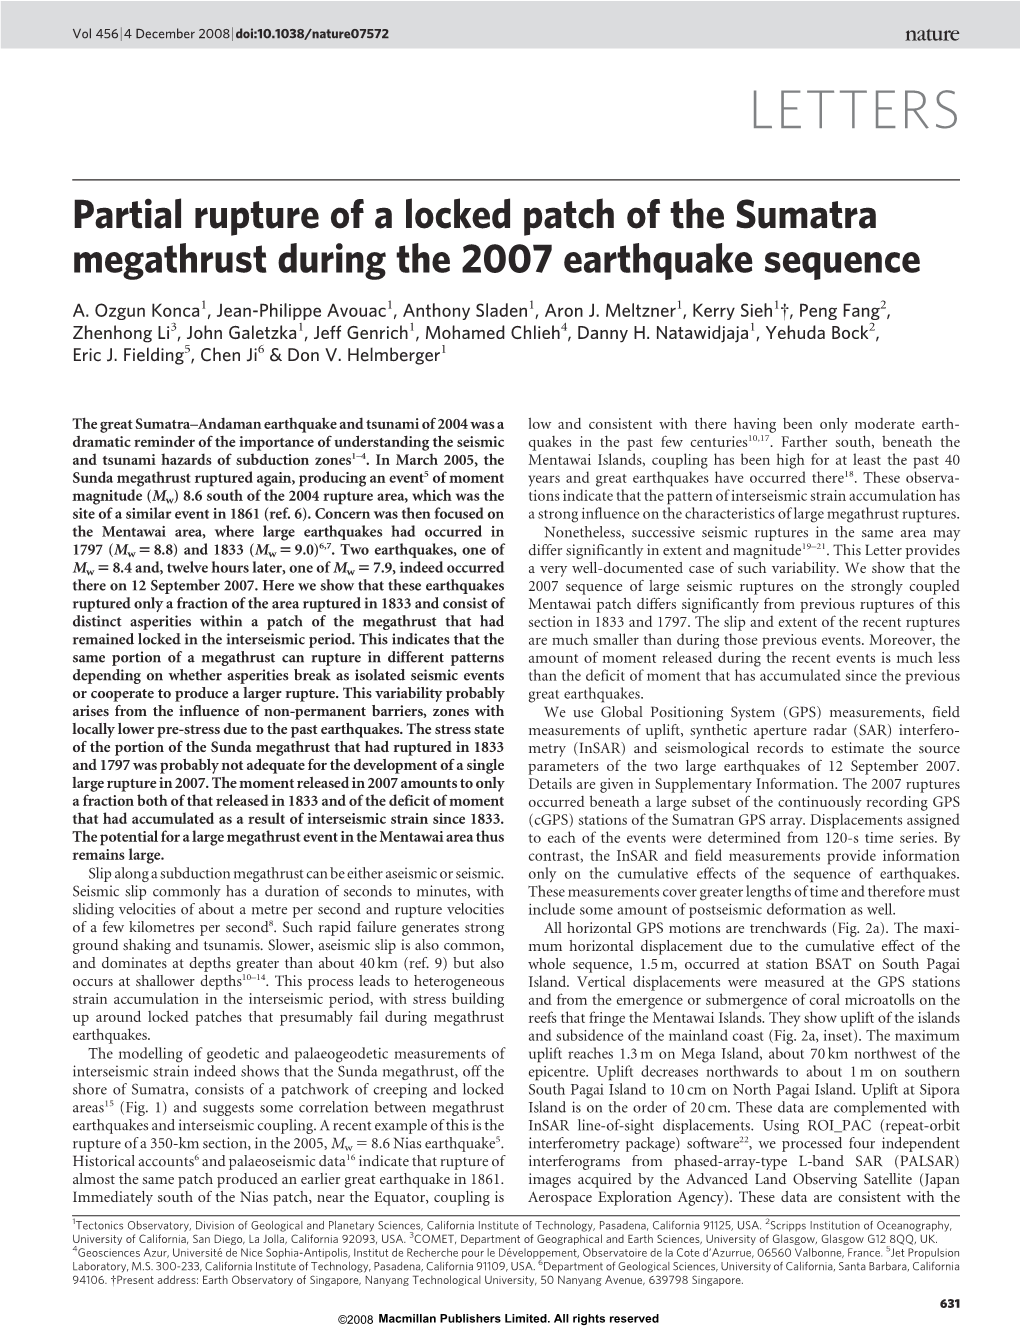 Partial Rupture of a Locked Patch of the Sumatra Megathrust During the 2007 Earthquake Sequence